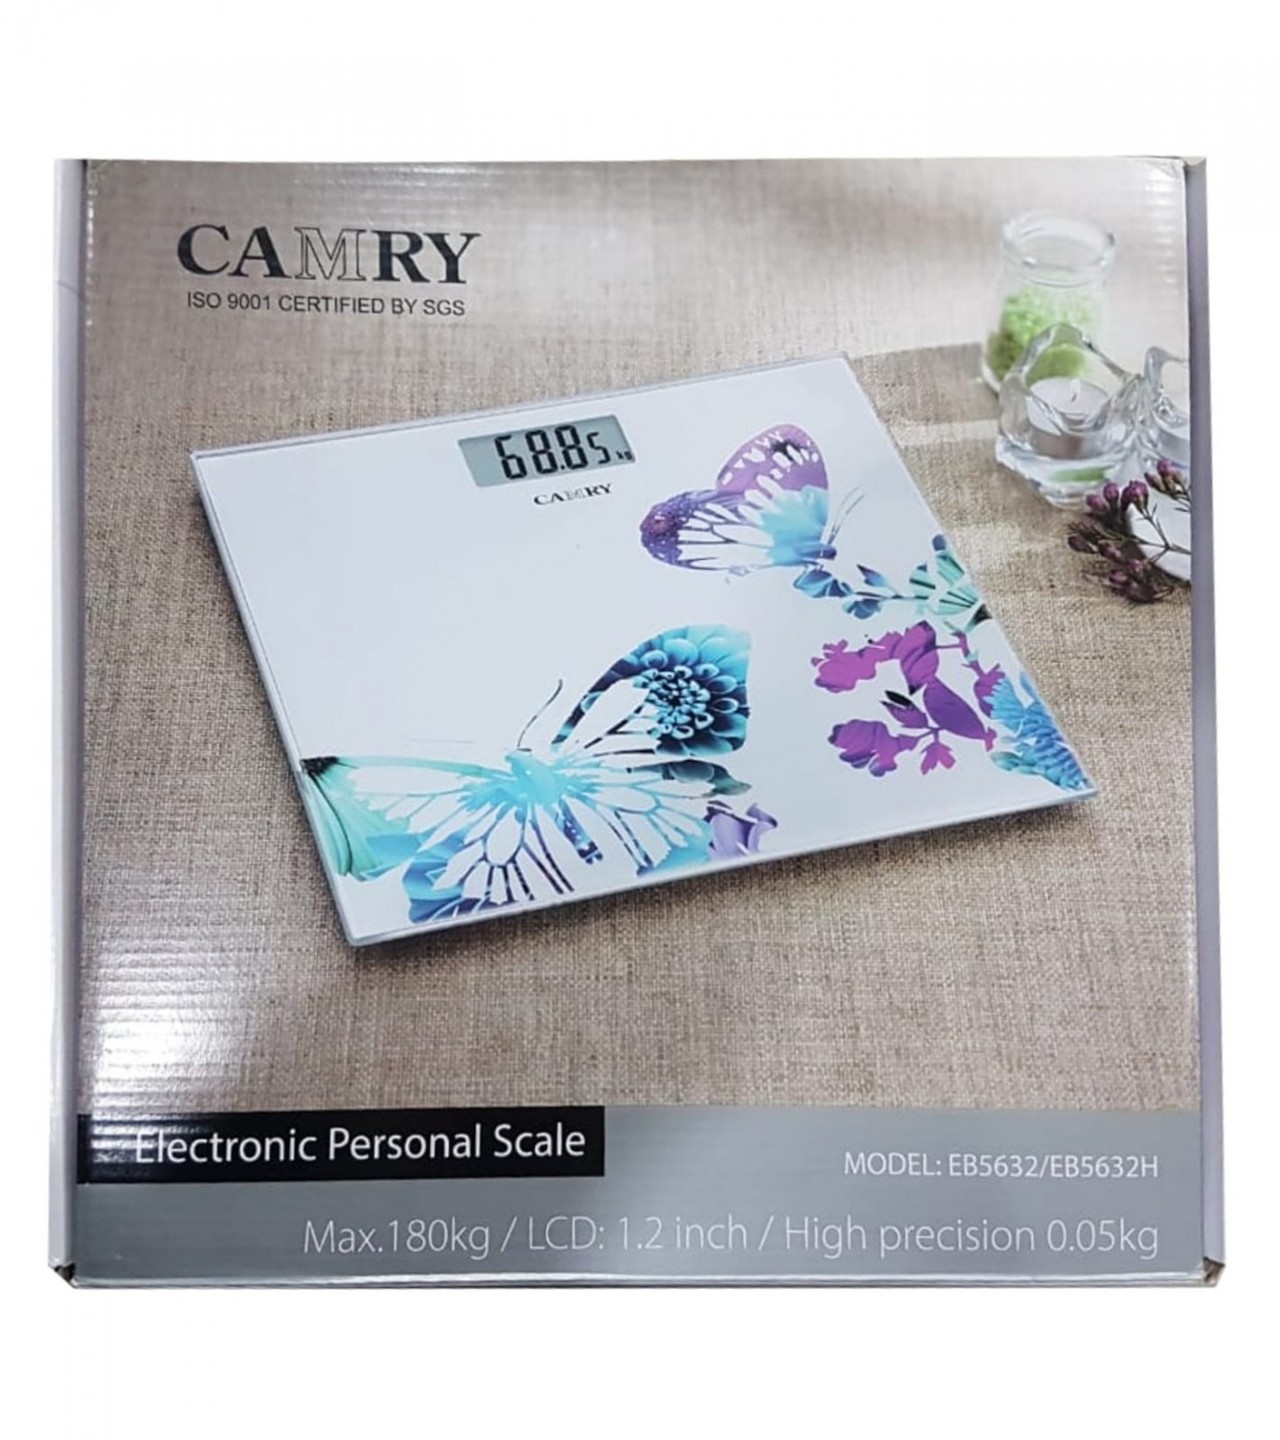 Camry Electronic Personal Scale Model:EB5632